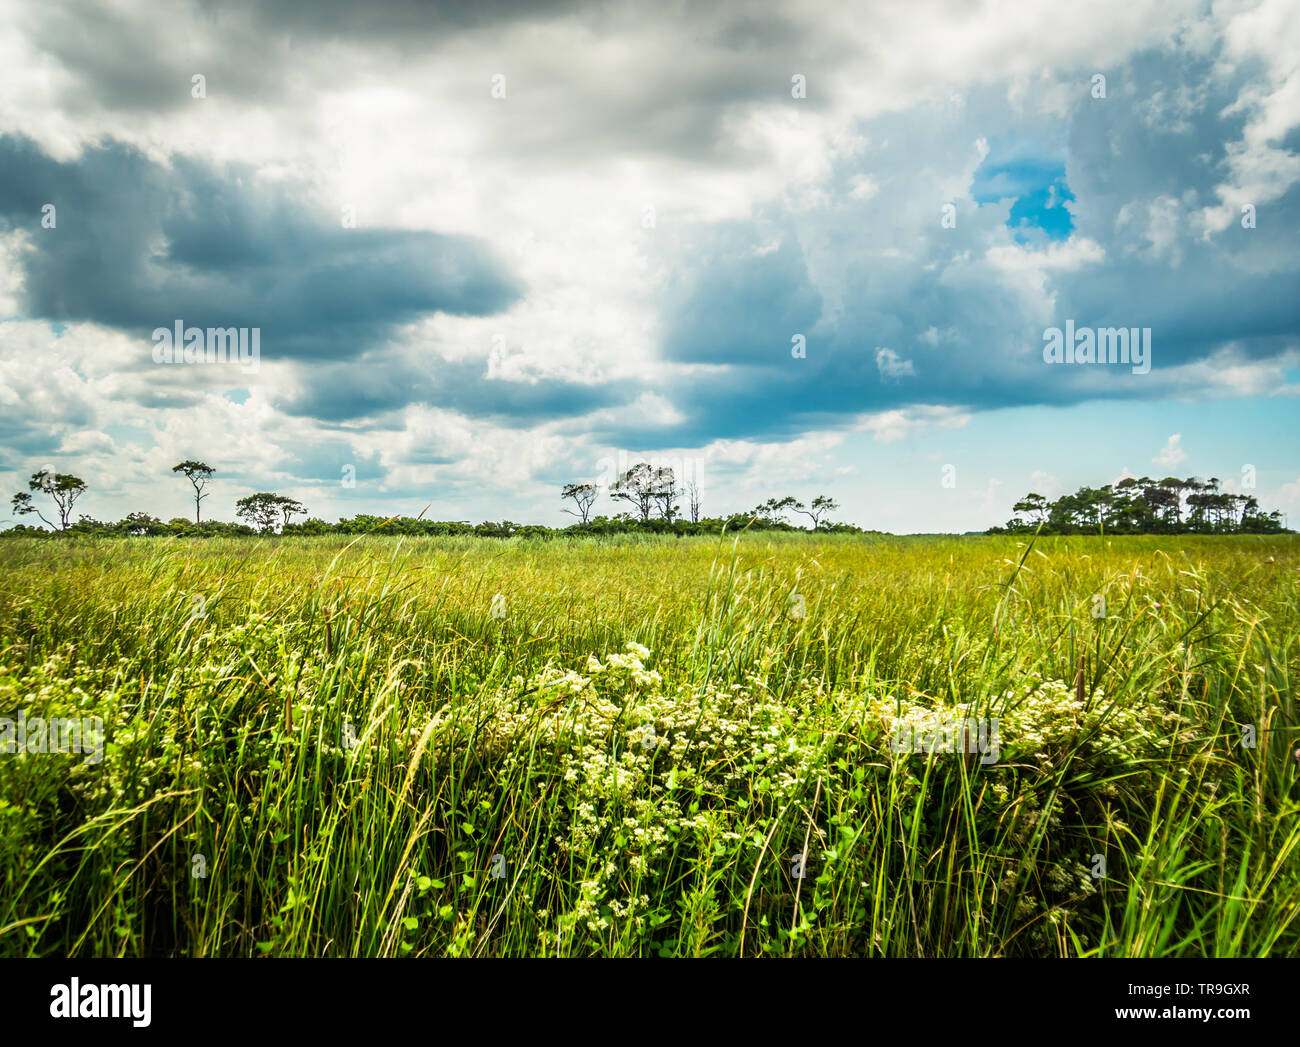 Low angle shot of a grass field with trees in the distance as storm clouds gather above Bodie Island in Nags Head, North Carolina, USA. Stock Photo